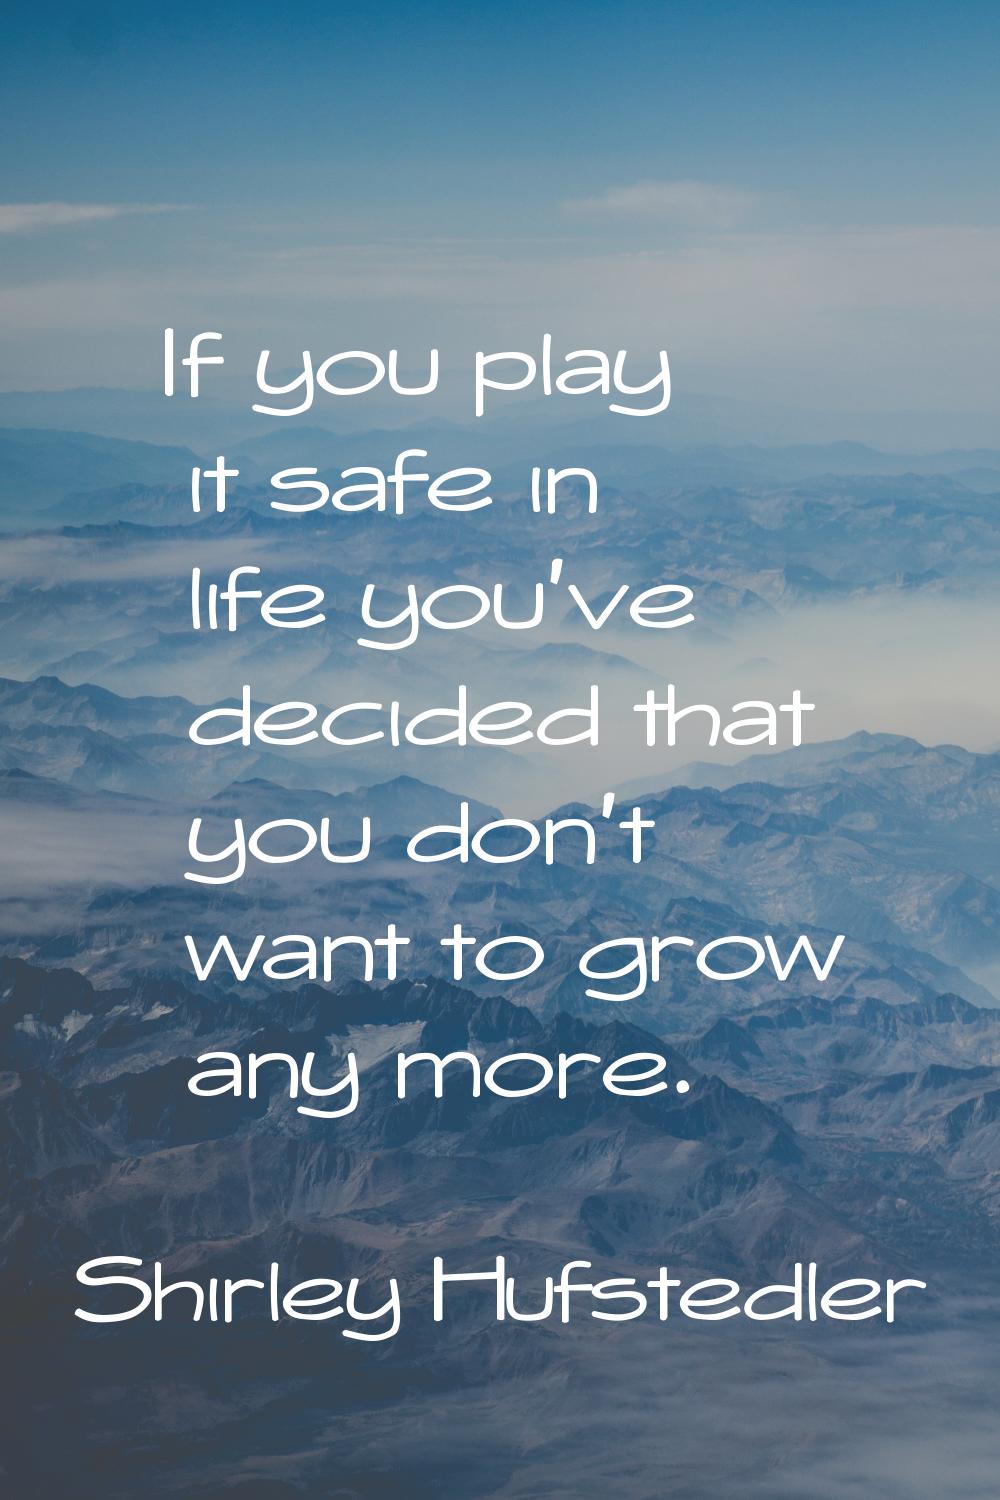 If you play it safe in life you've decided that you don't want to grow any more.